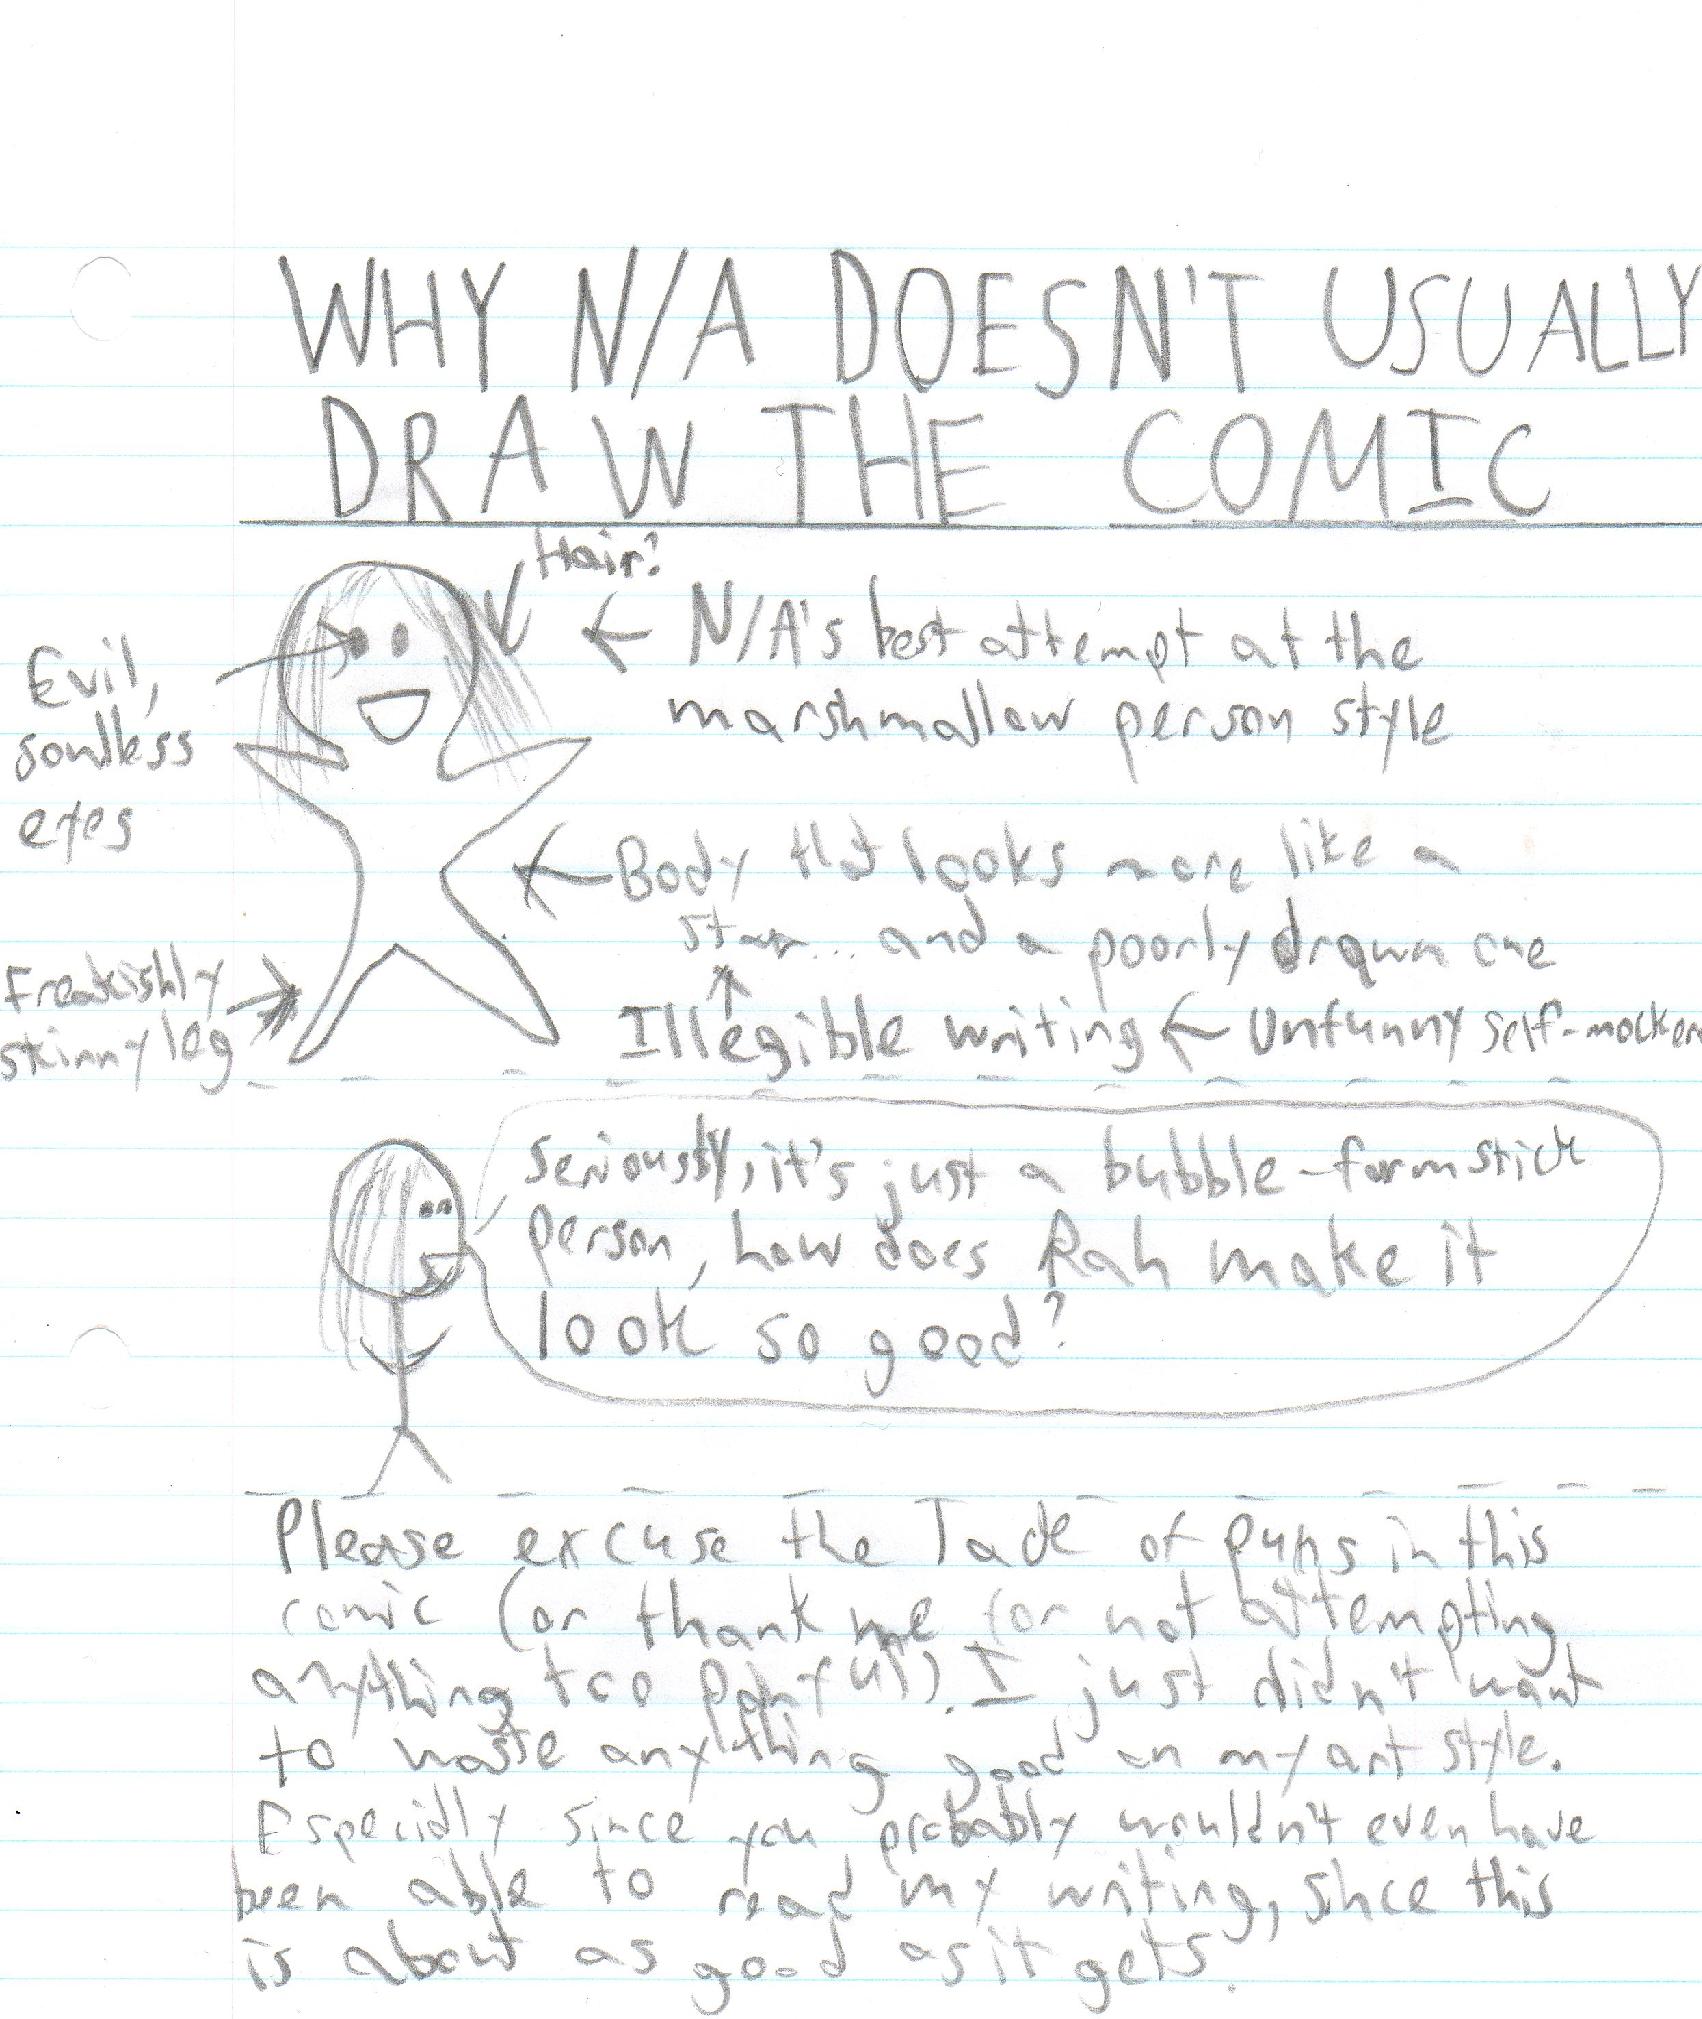 Why N/A Doesn't Usually Draw The Comic